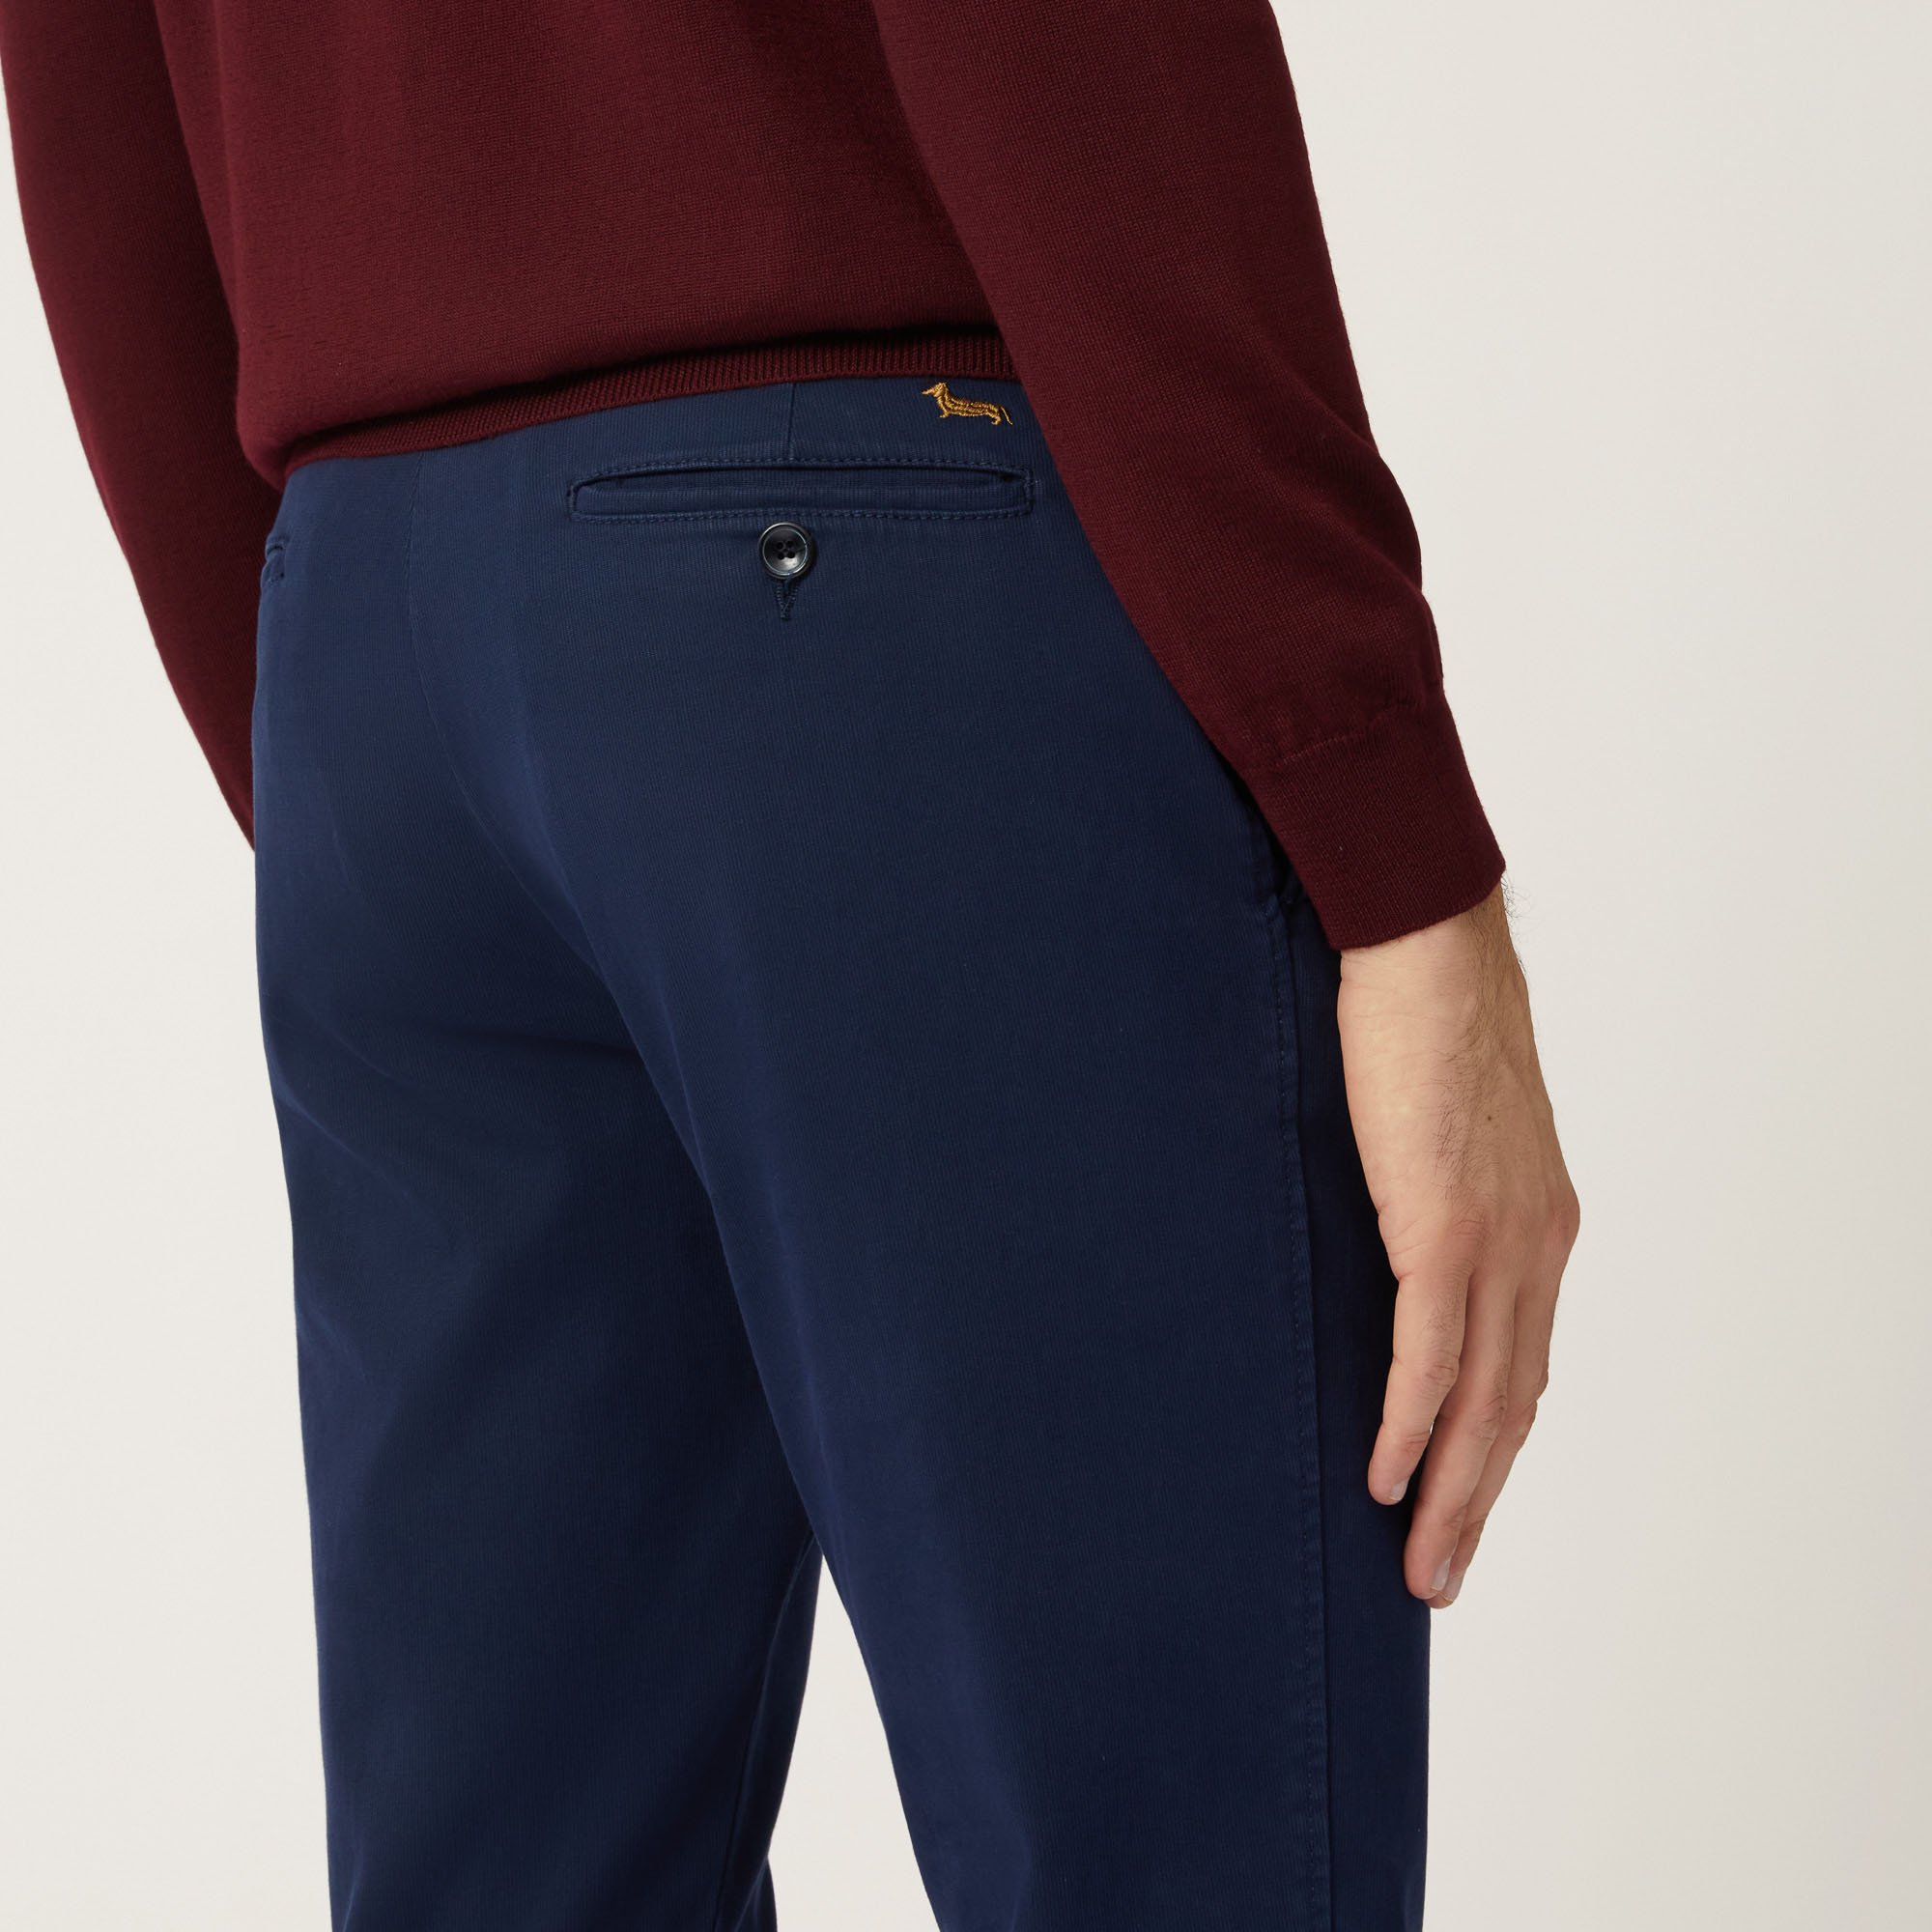 Pantalone Chino Narrow In Cotone Stretch, Blu Navy, large image number 2